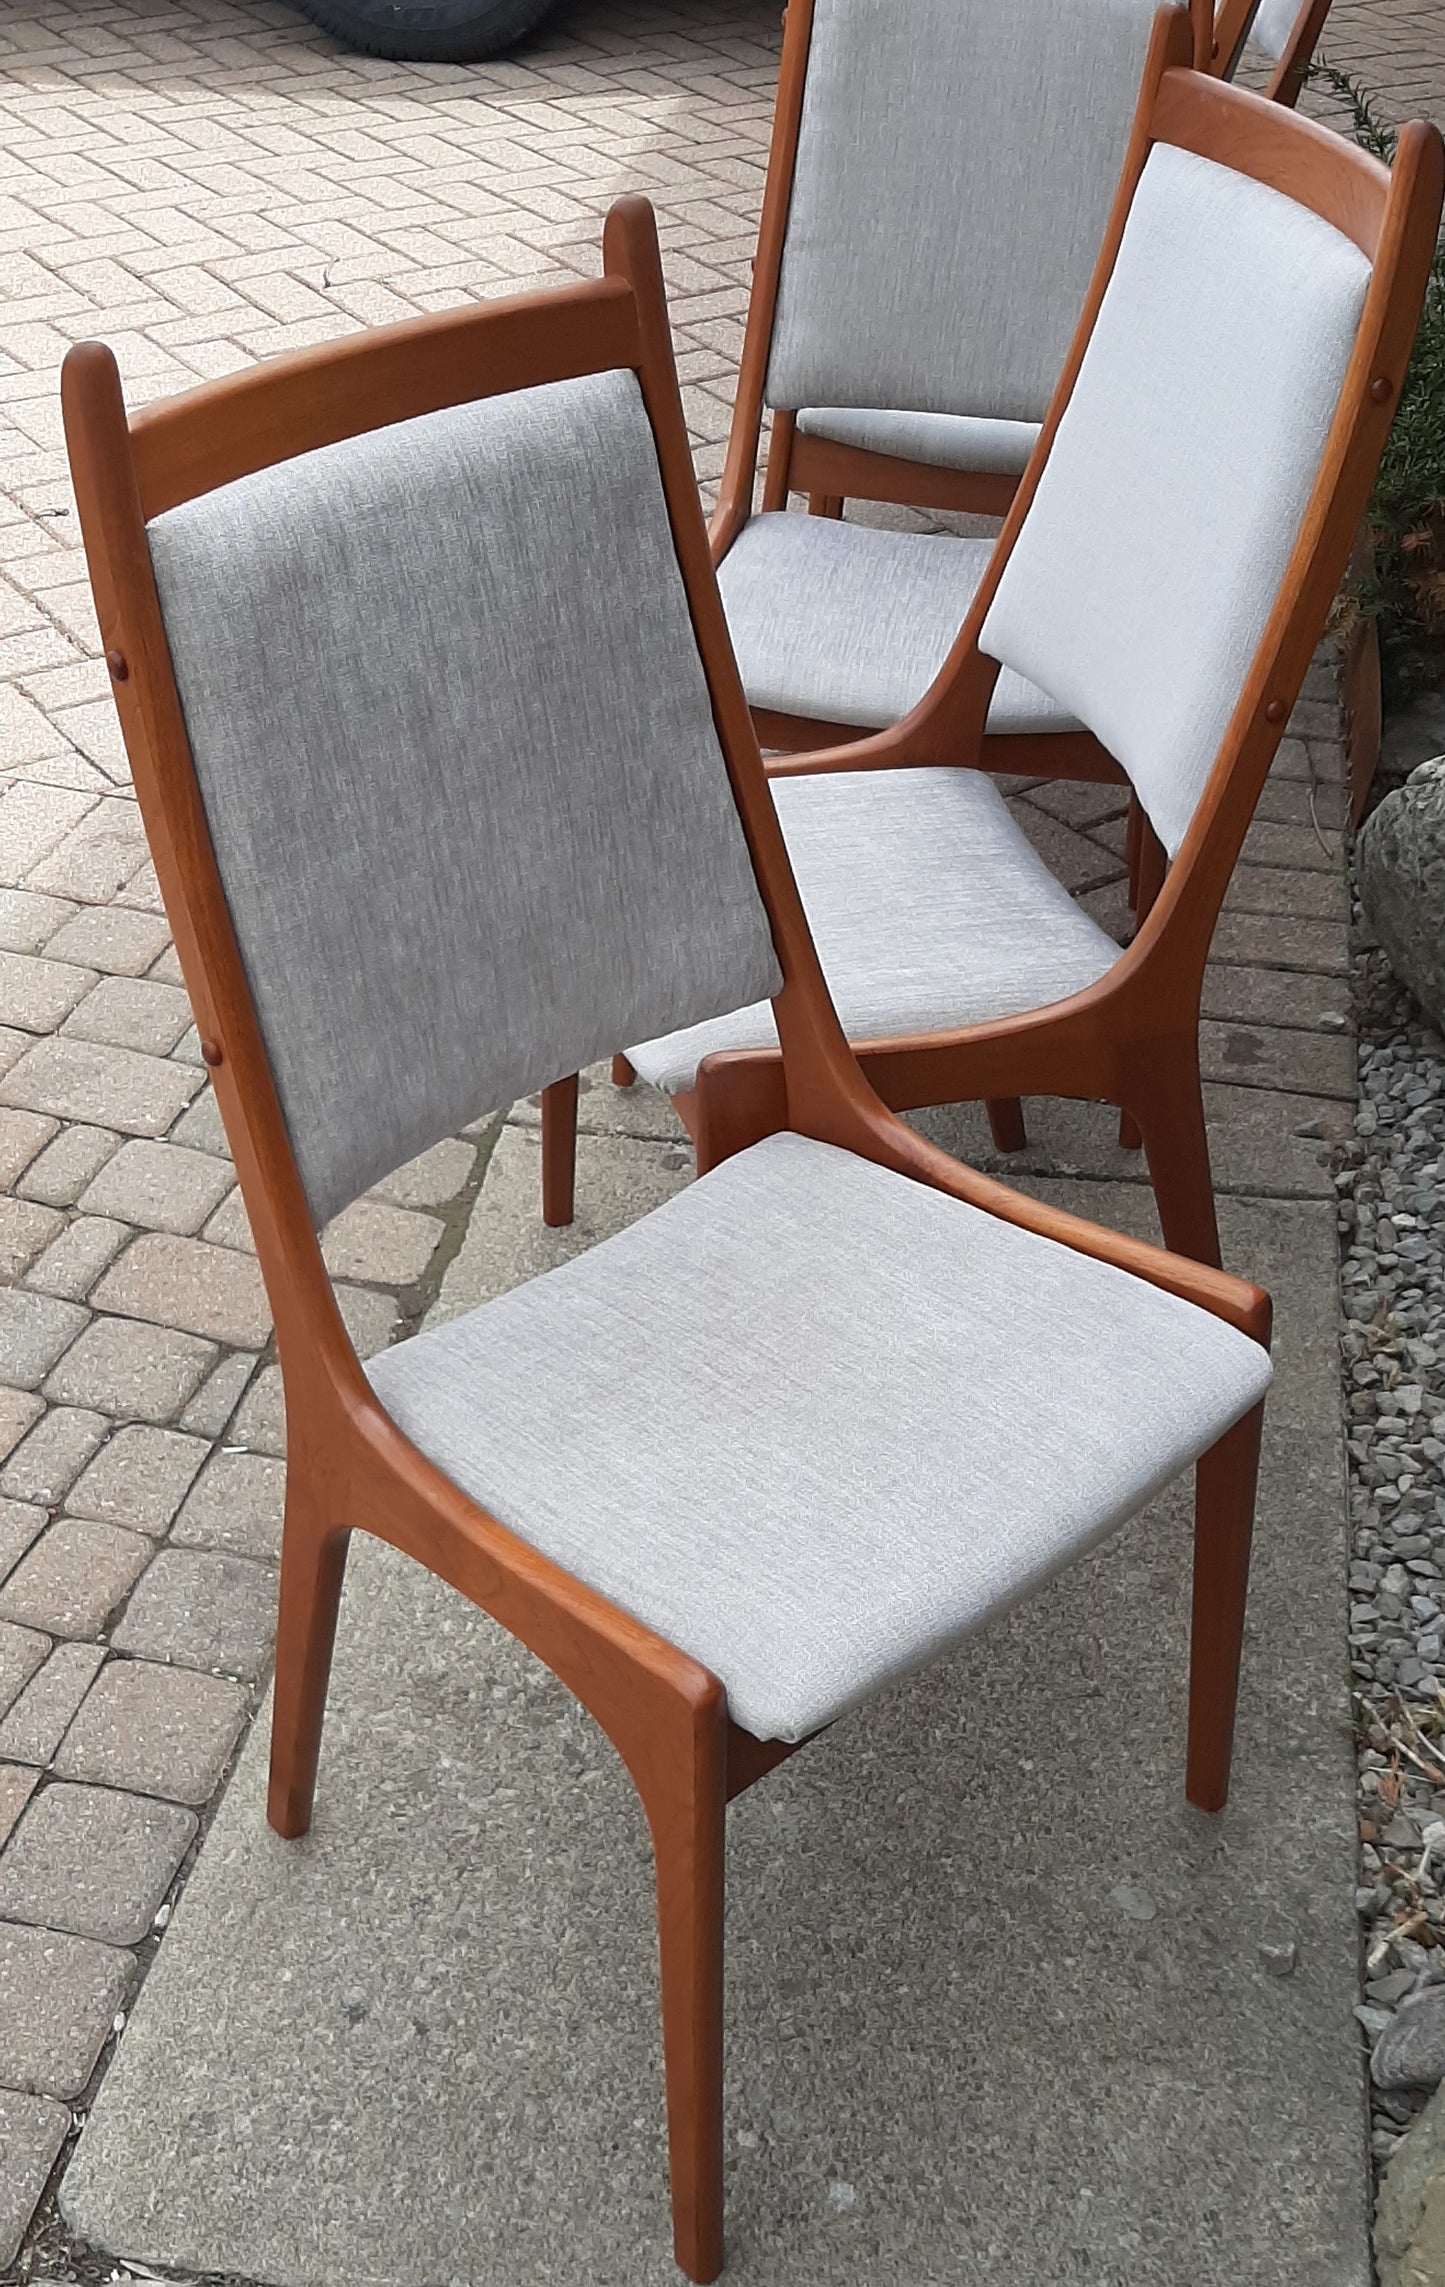 Set of 6 MCM Teak Chairs, RESTORED REUPHOLSTERED in KNOLL stain resistant fabric